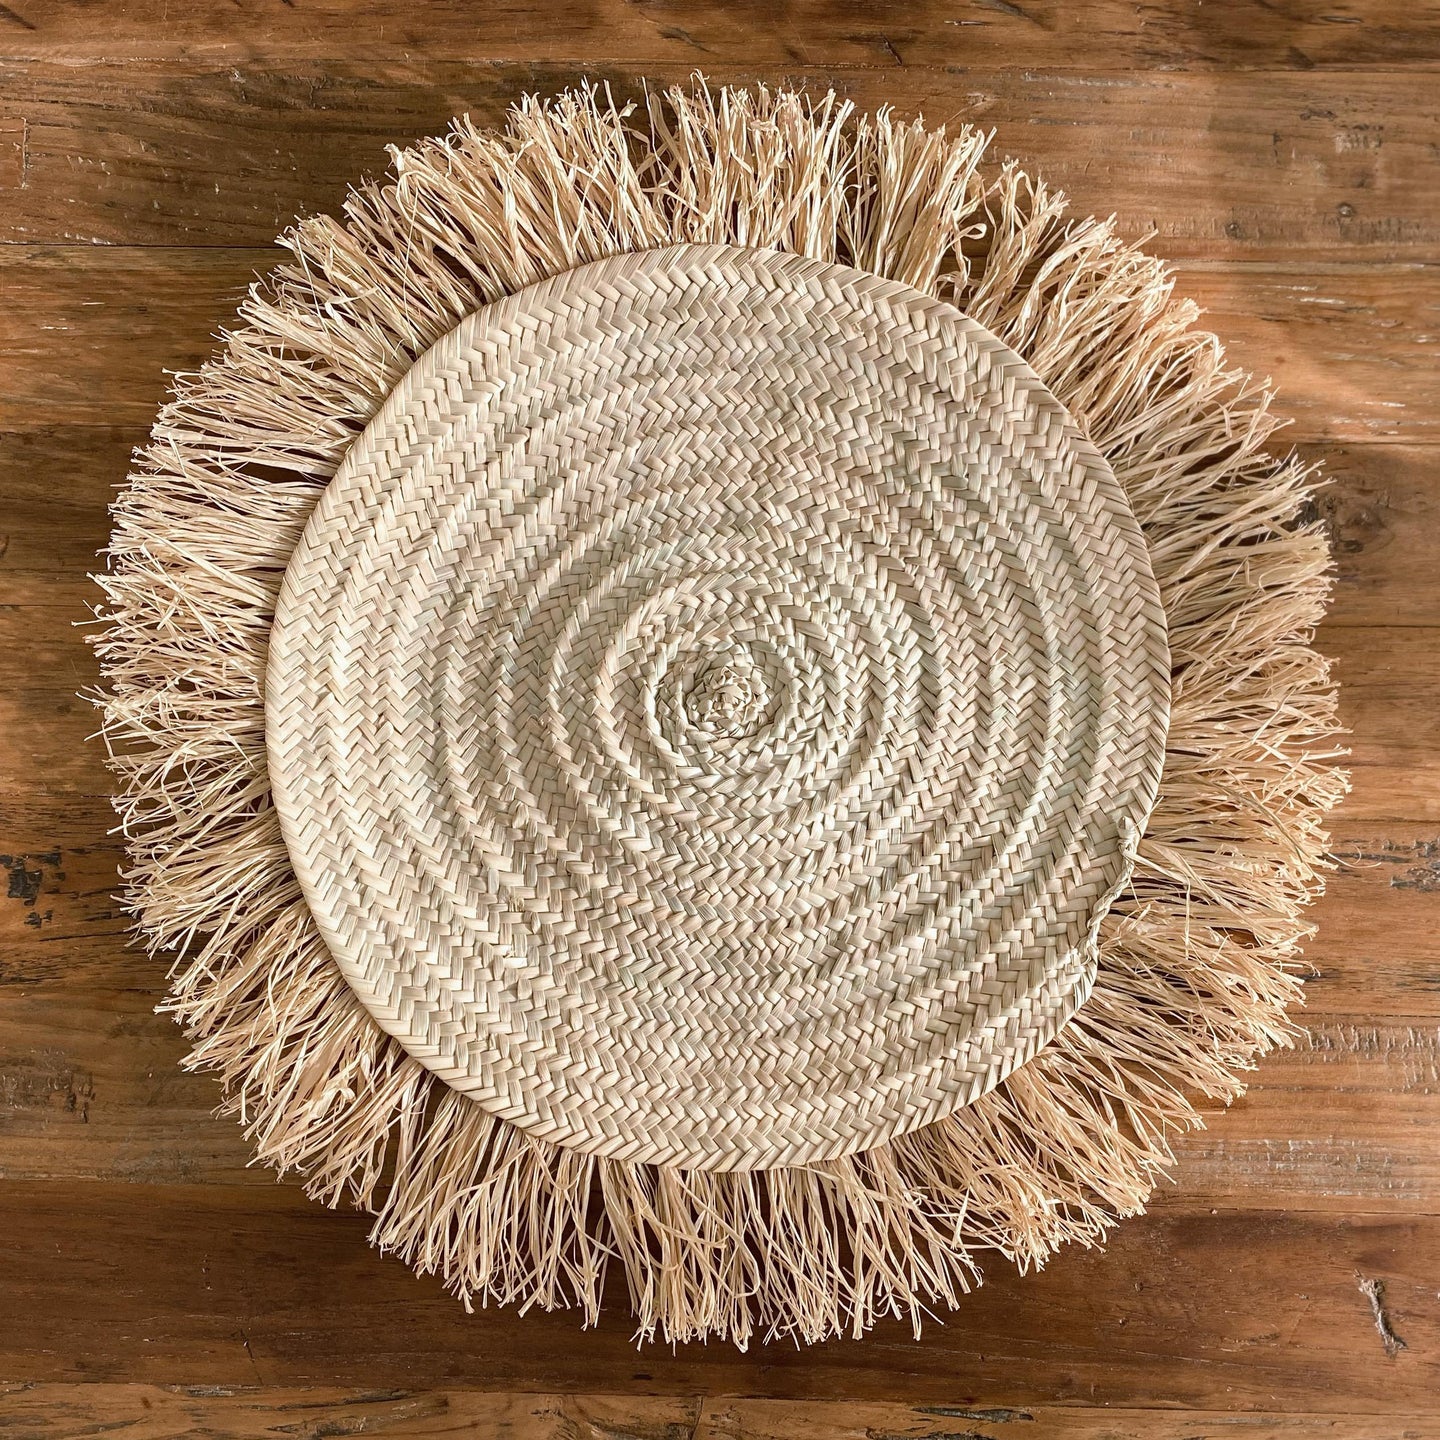 Raffia placemat with fringes